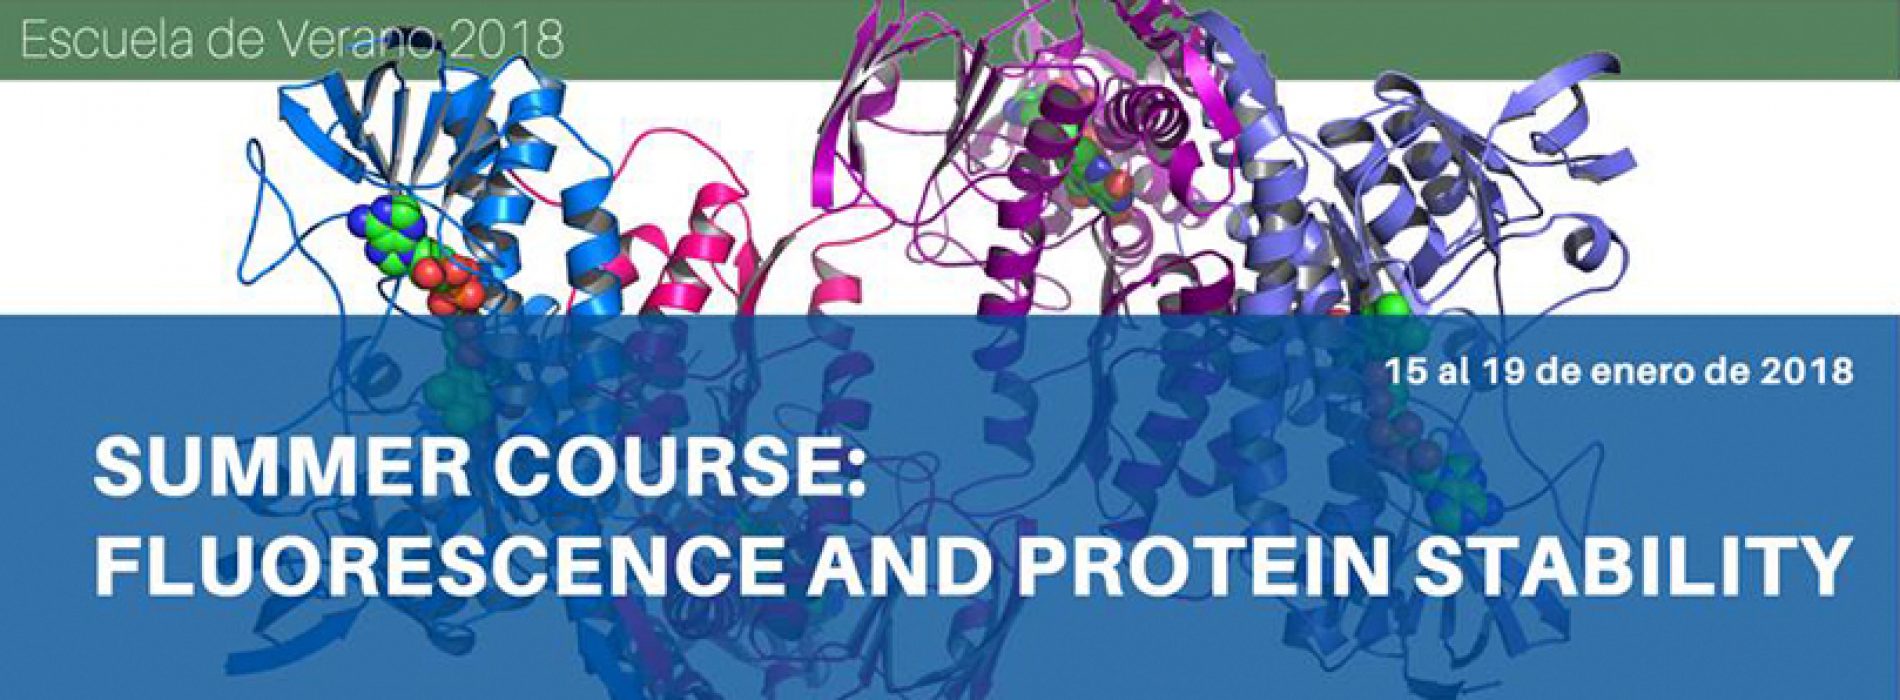 Summer Course: Fluorescence and Protein Stablility